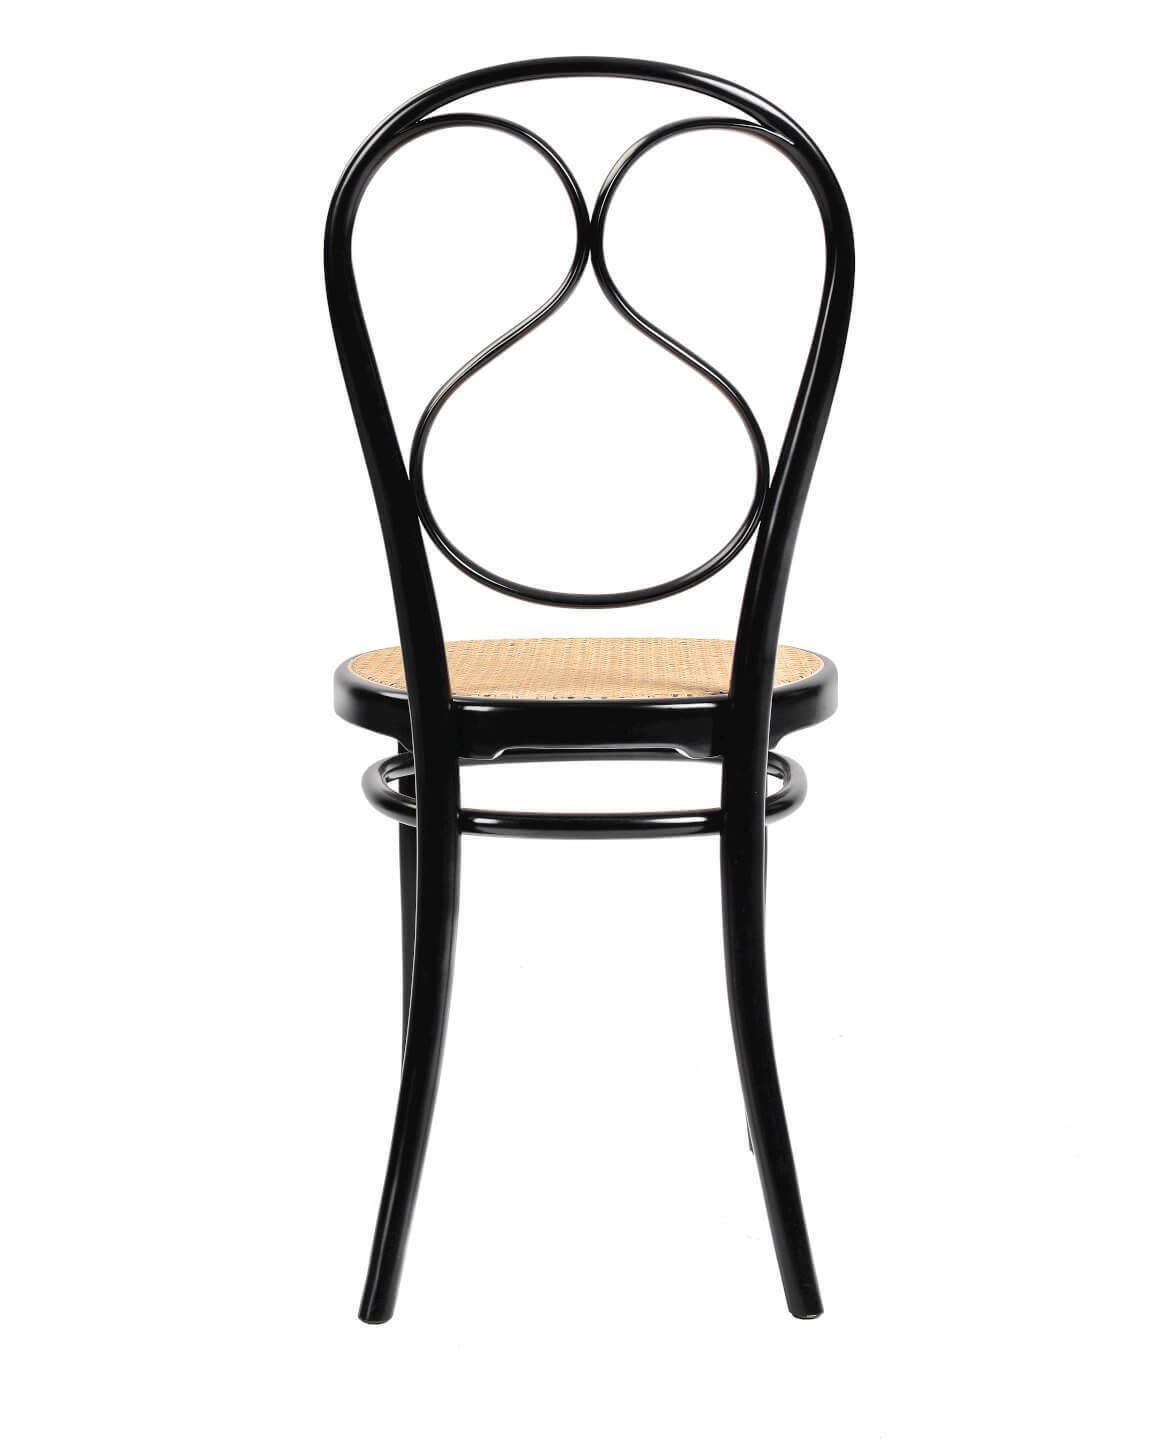 Supple, light, and elegant. This chair, designed in 1849, uses the new technique of steam bent beech wood, and clearly shows the philosophy aimed at simplifying the components to enable mass production. The seat is made from cane.

Additional